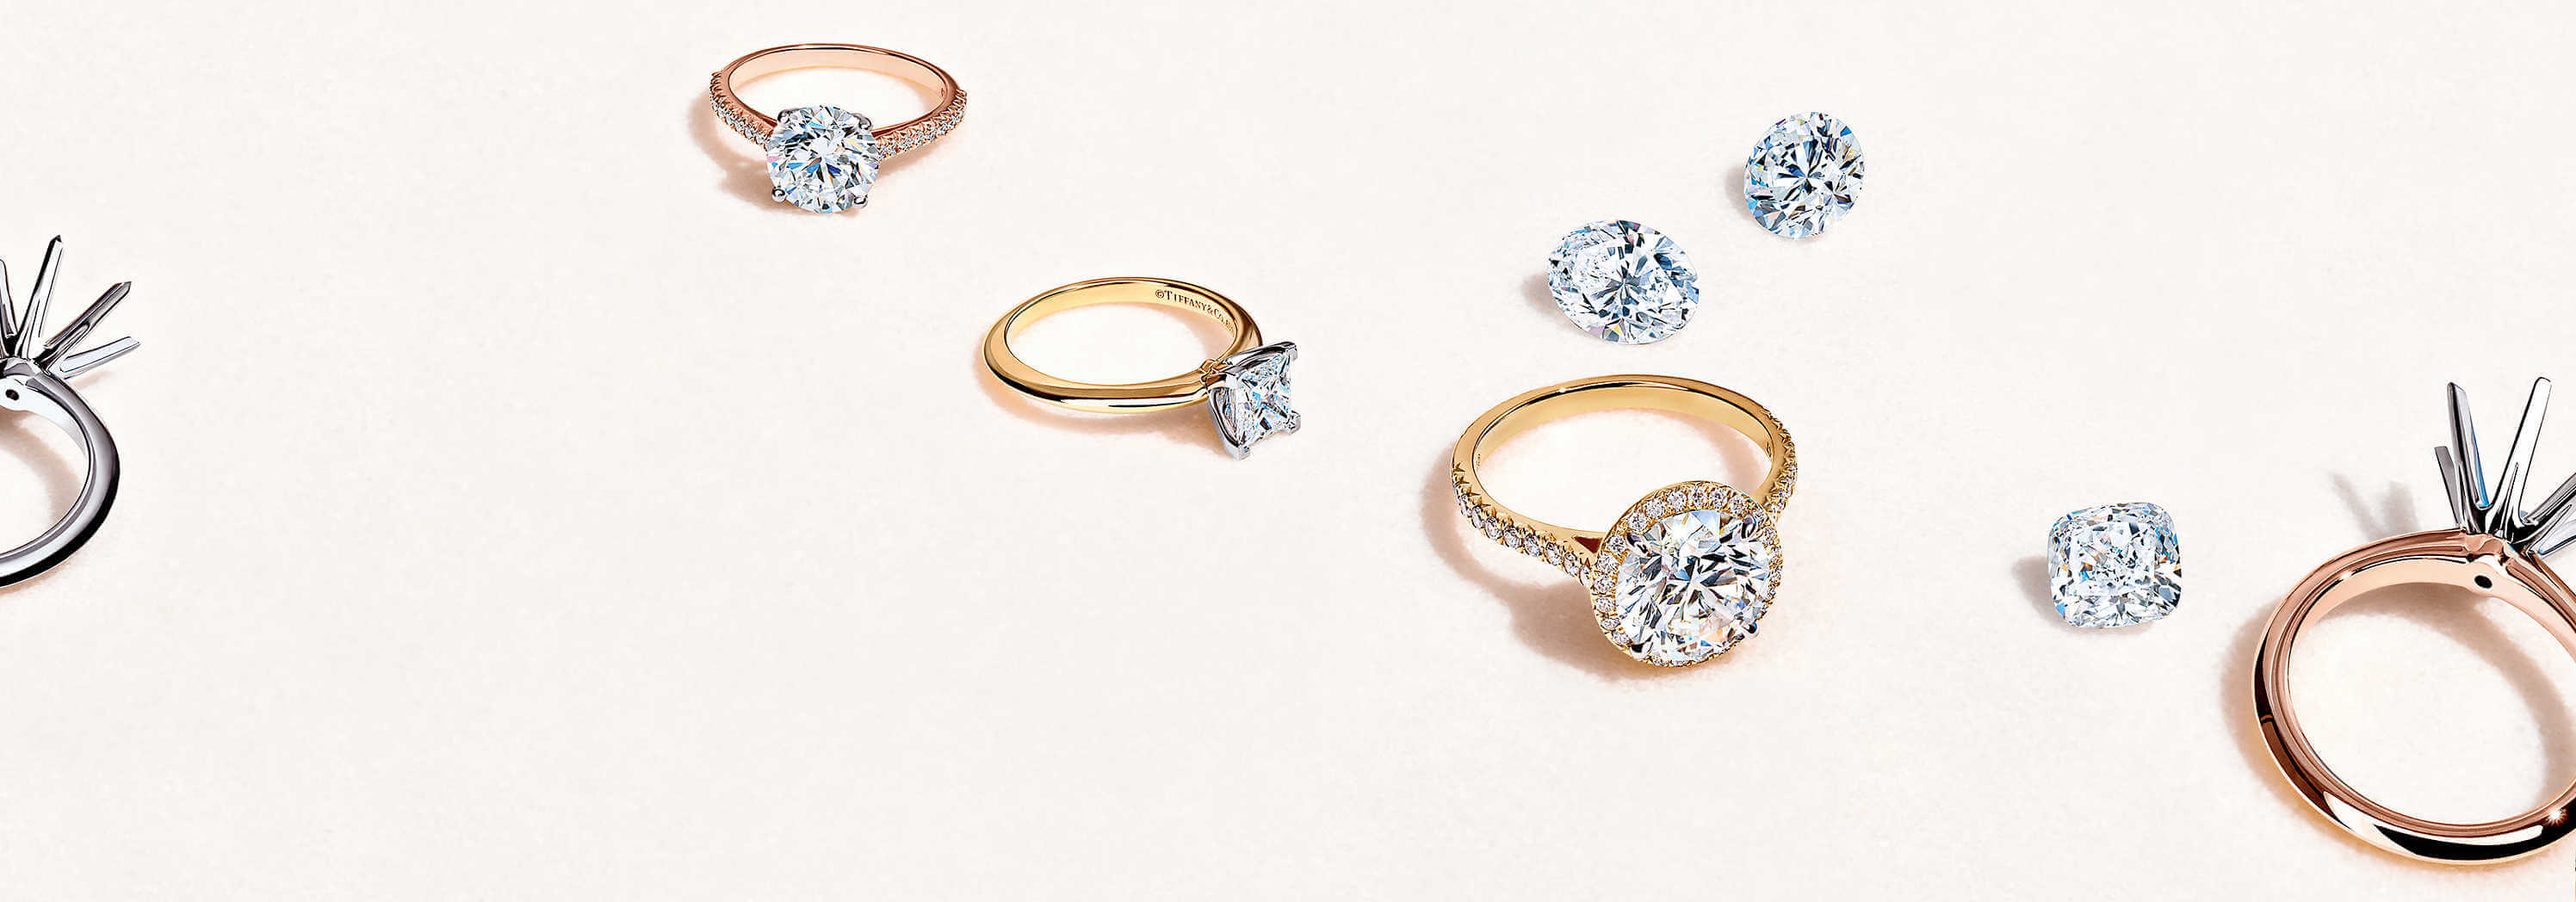 The Most Popular Ring Settings | Simon G. Jewelry